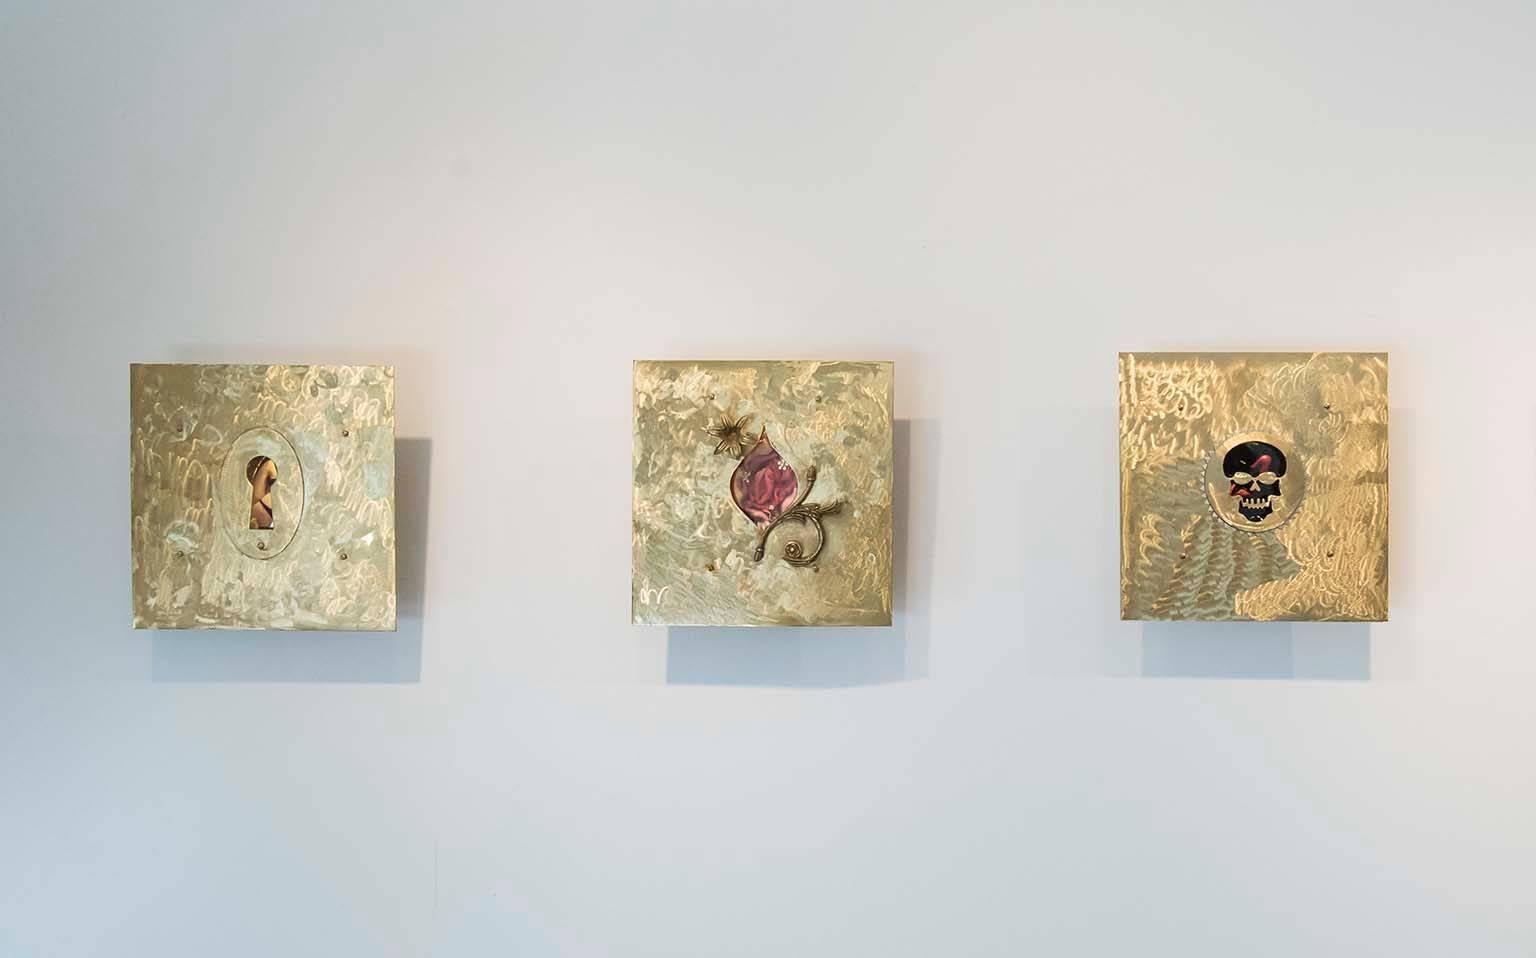 View Box 2, brass wall sculpture with sparkling rhinestones, reveals an erotic flower in petal pinks. The artist’s sculptural works and paintings investigate the  objectification of women historically and in contemporary society. Exploring female